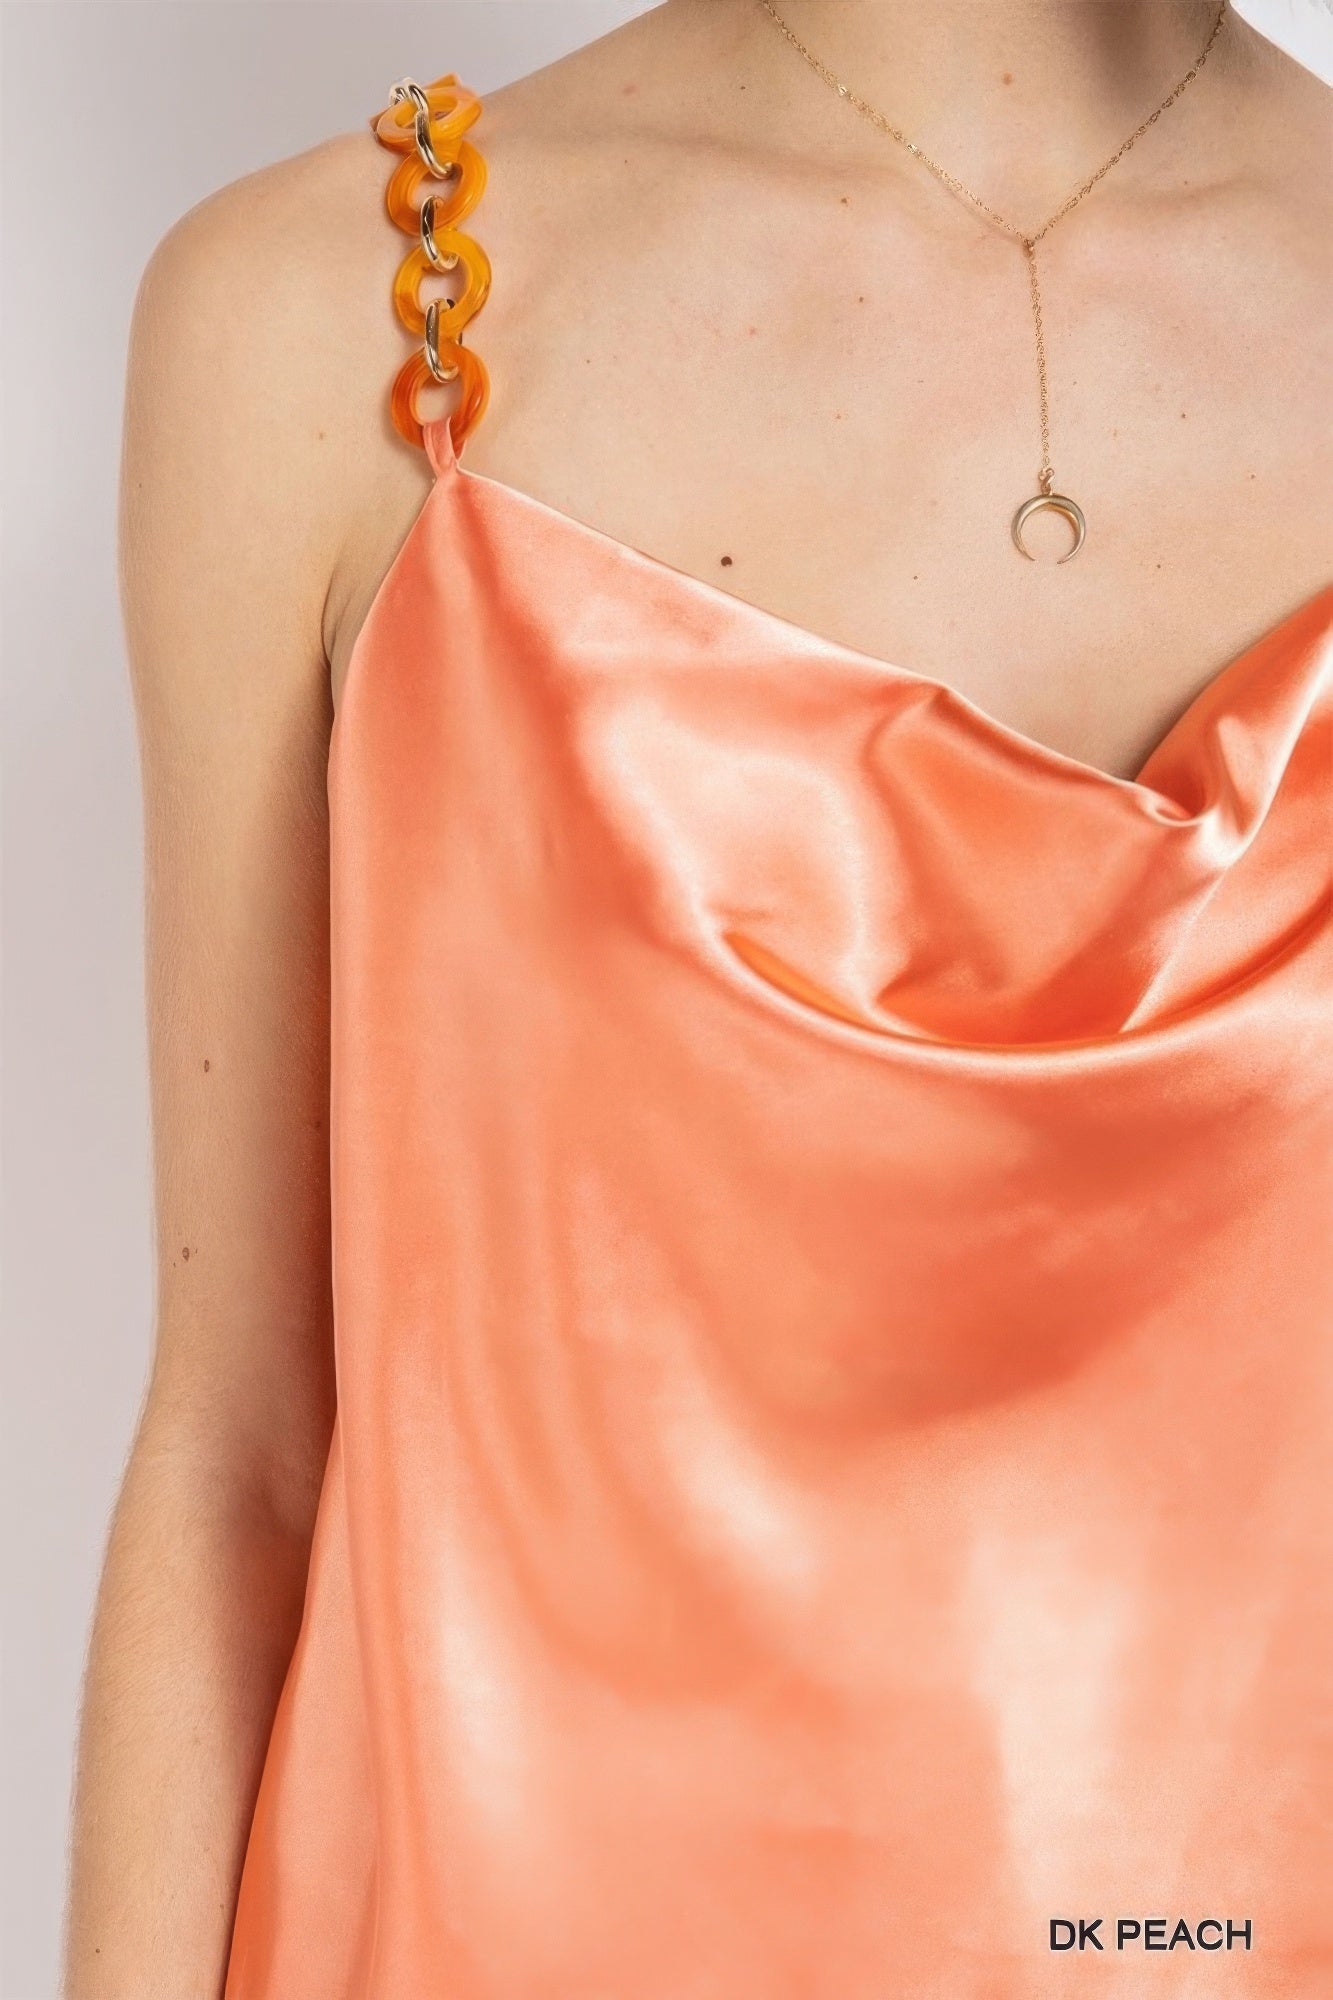 THE ELYSE Cowl neck satin camisole with chain strap